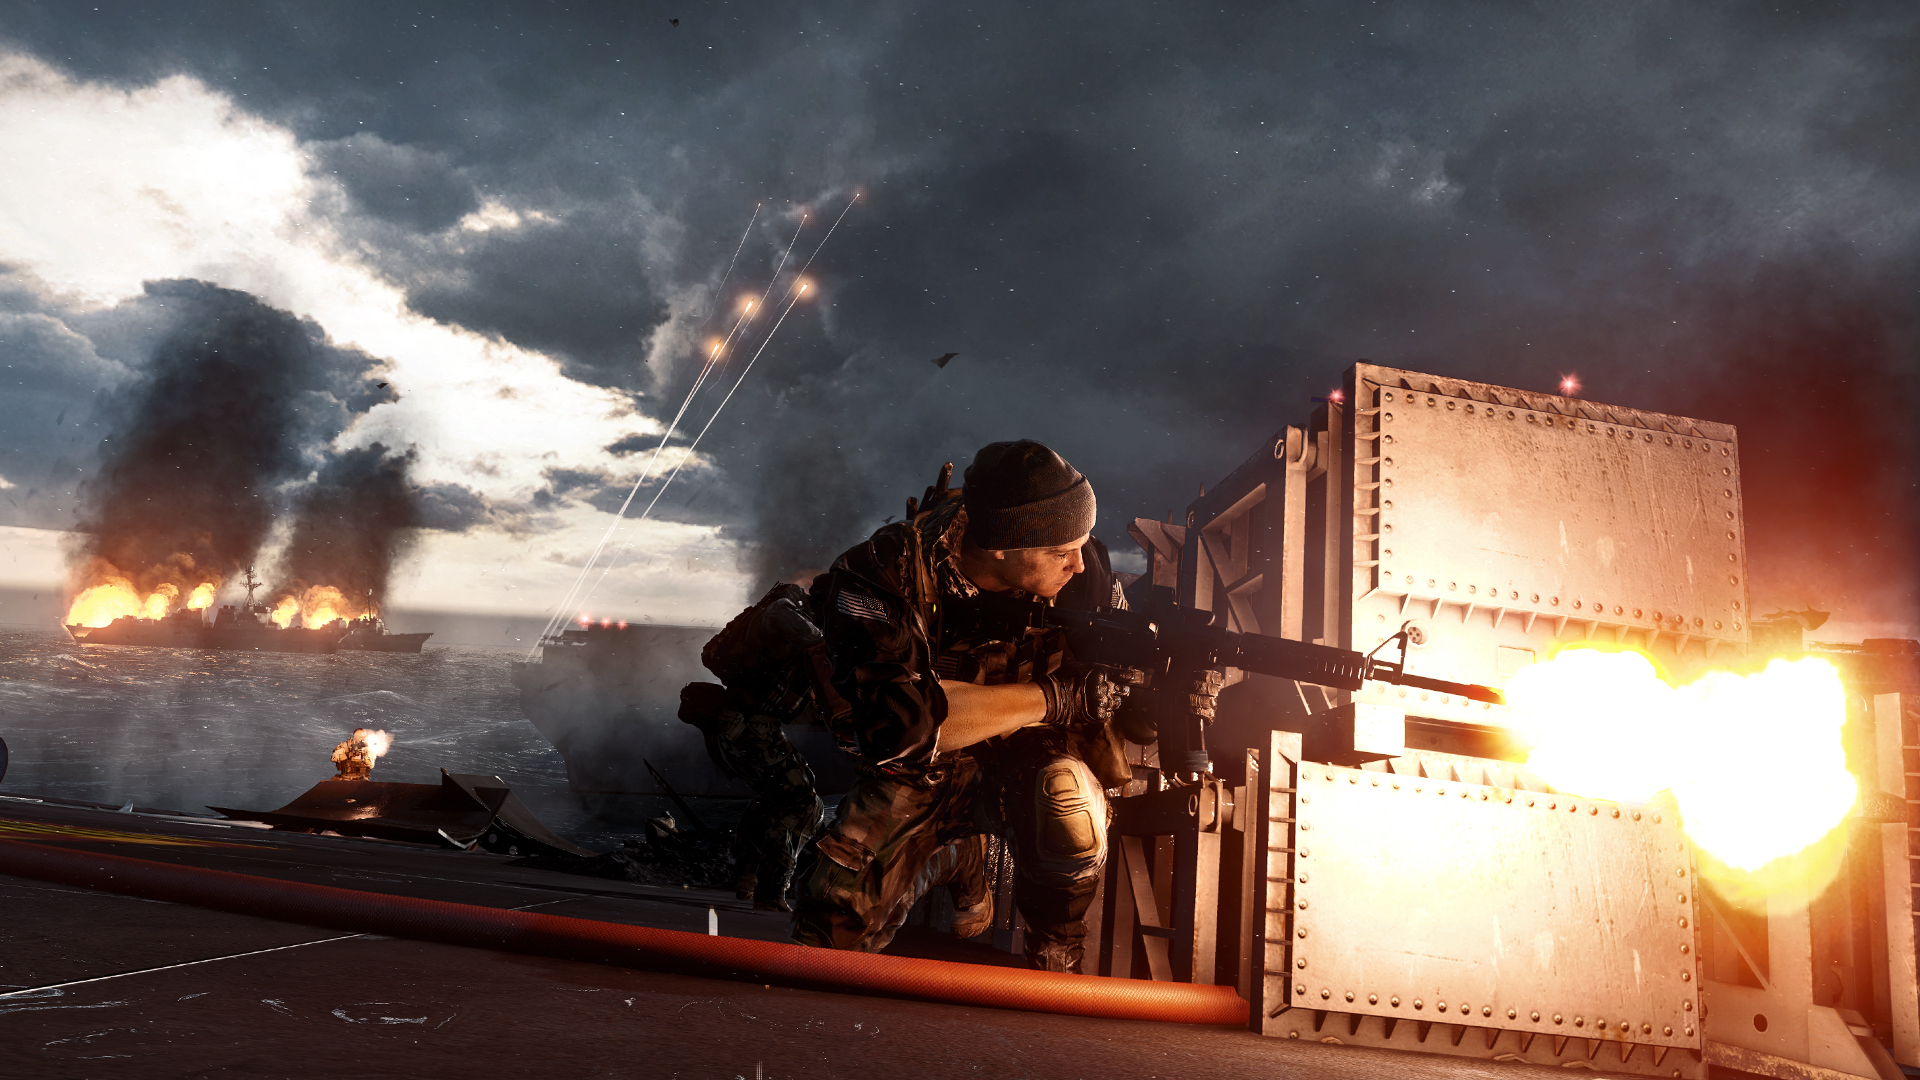 Battlefield 4 Extended Cinematic Tools Showcased, Allowed On Non